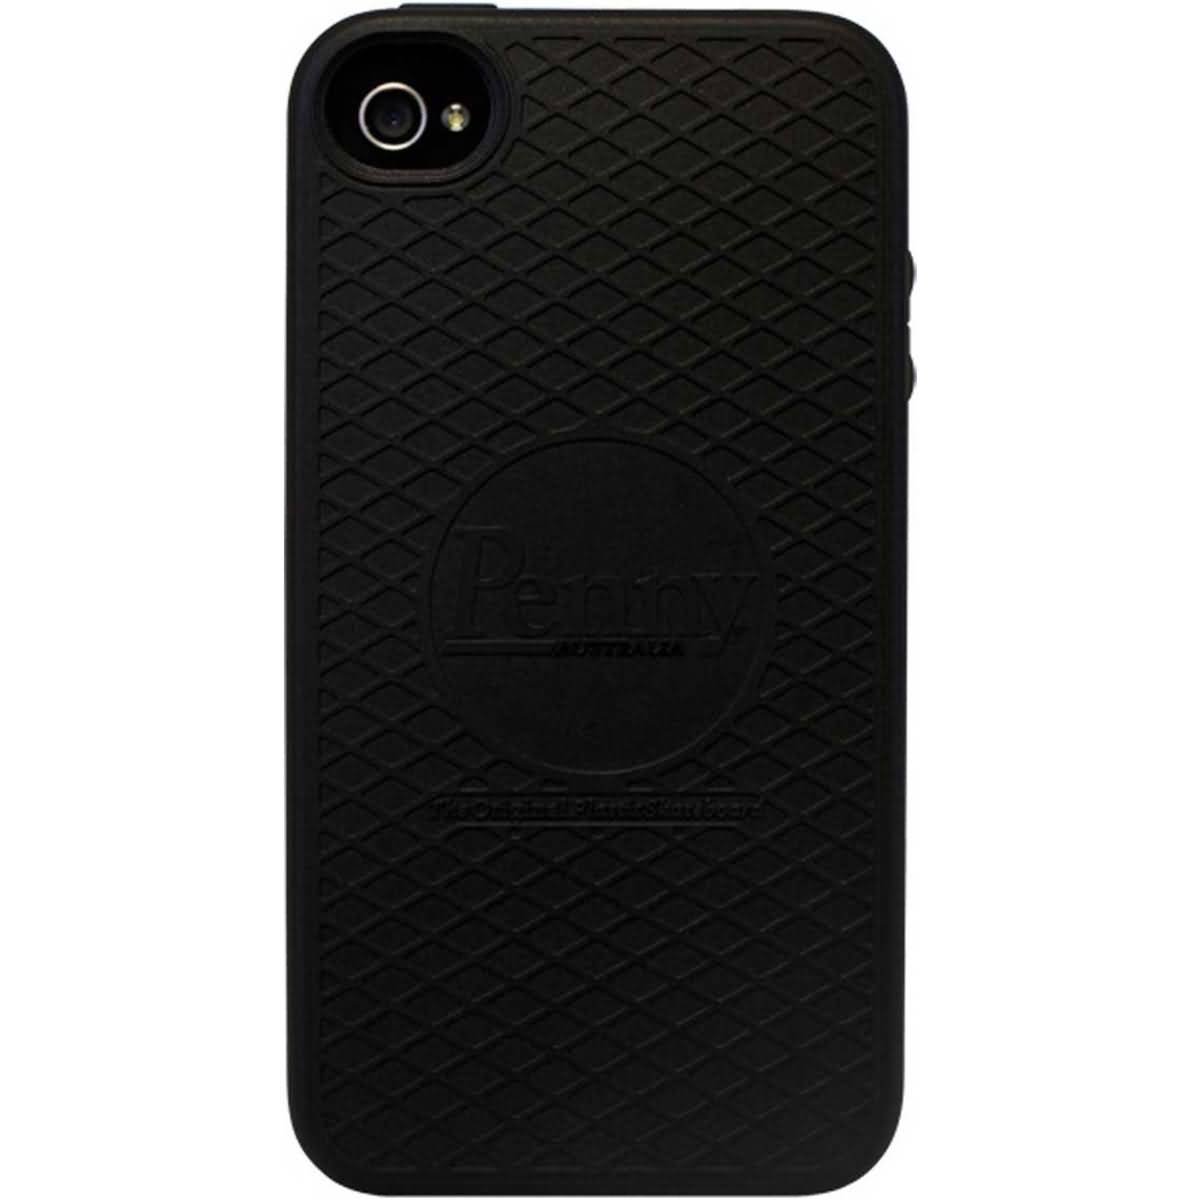 Penny Iphone 4/4s Case Phone Accessories (Brand New) – - Skate/Surf/Sports